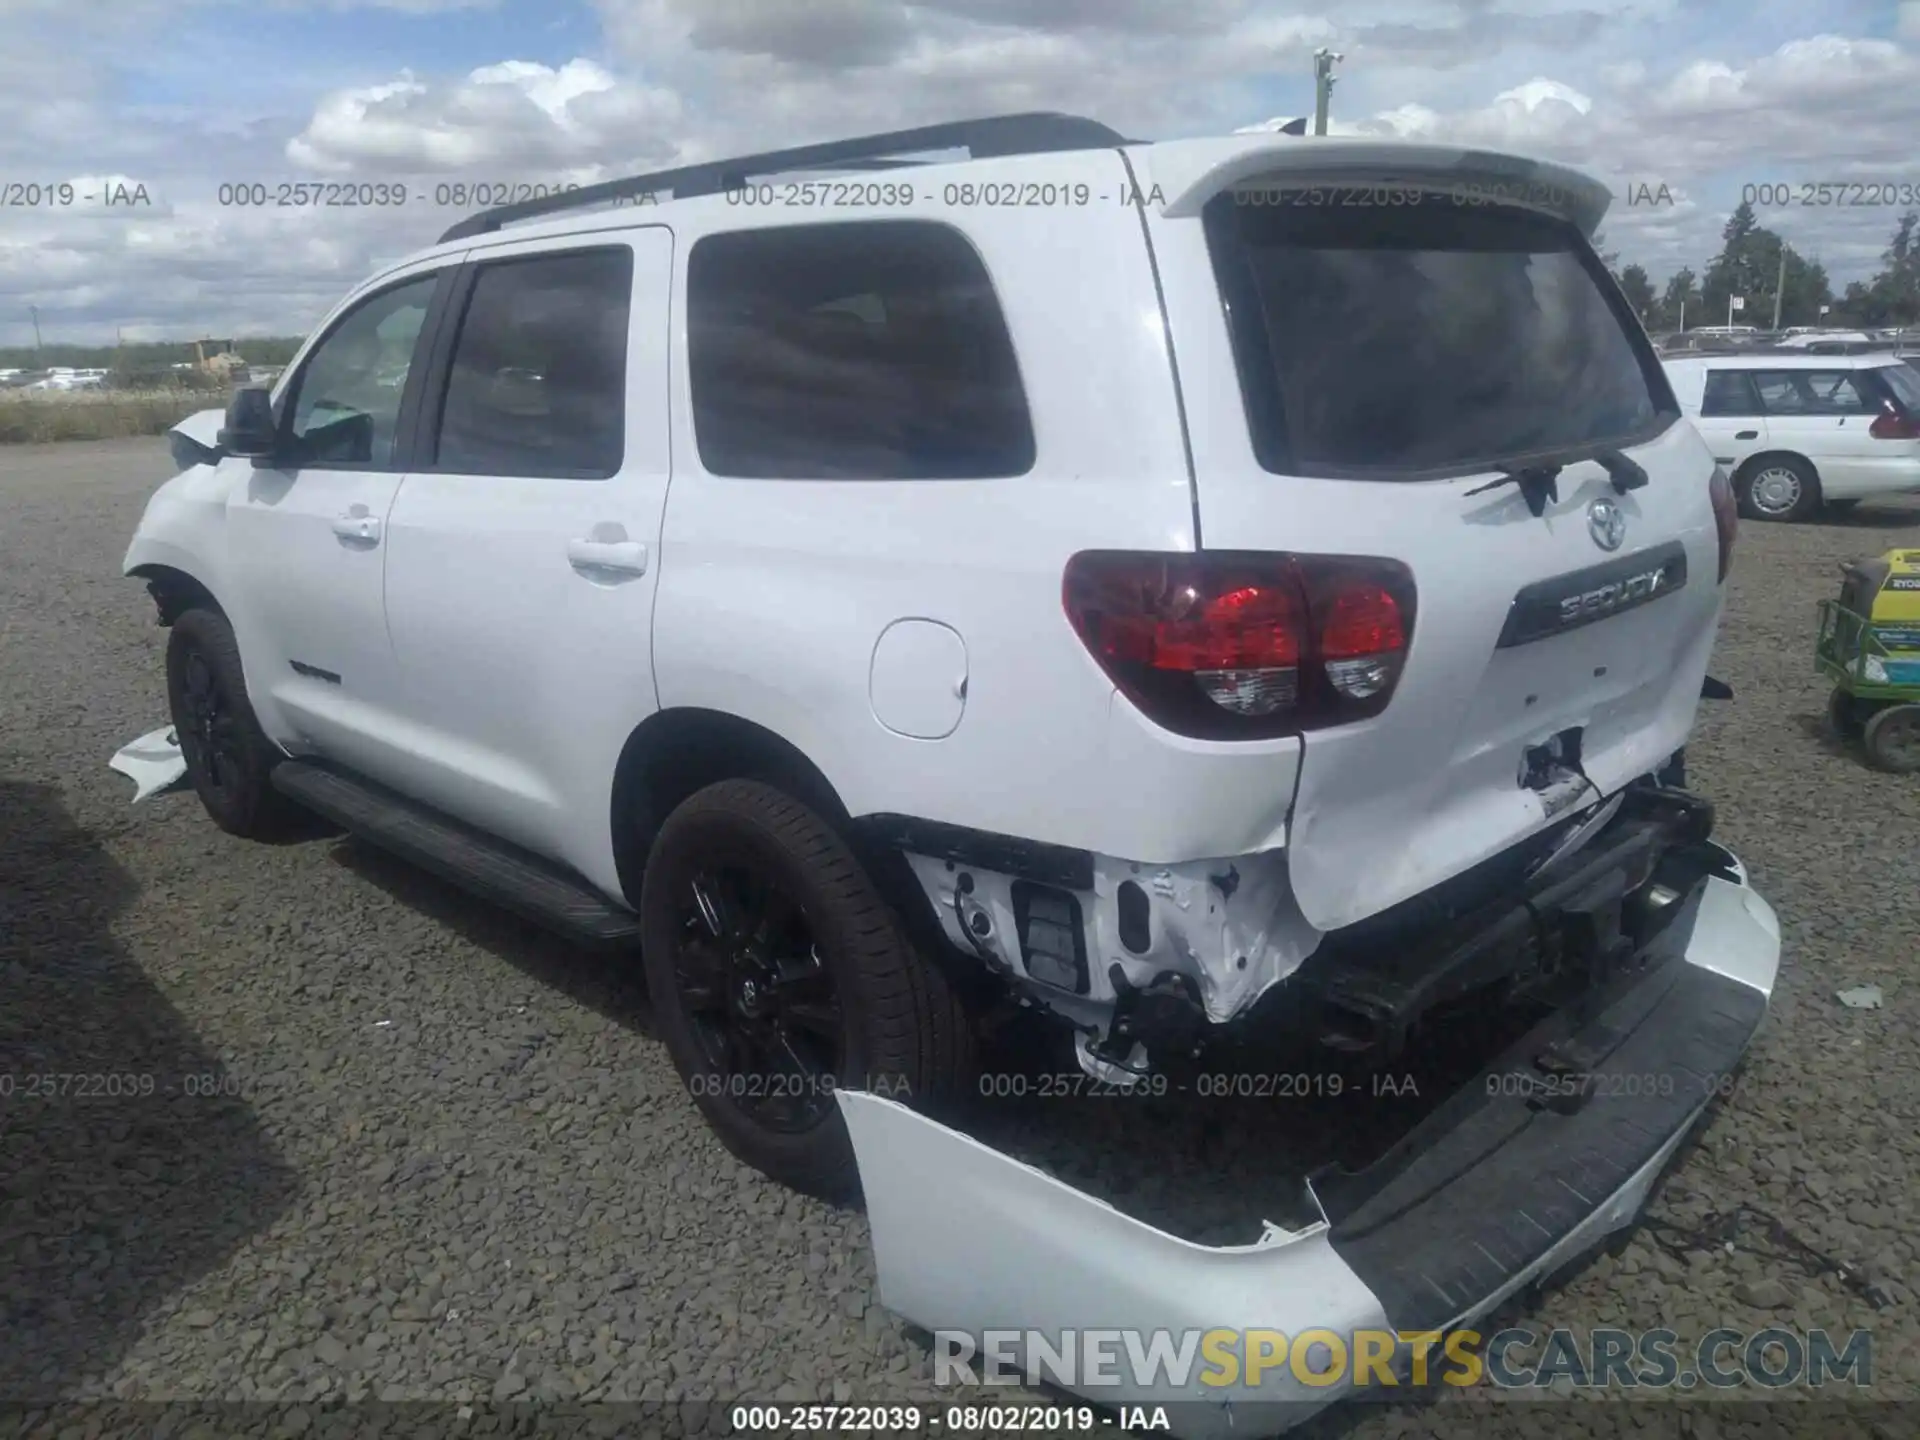 3 Photograph of a damaged car 5TDBY5G12KS168056 TOYOTA SEQUOIA 2019